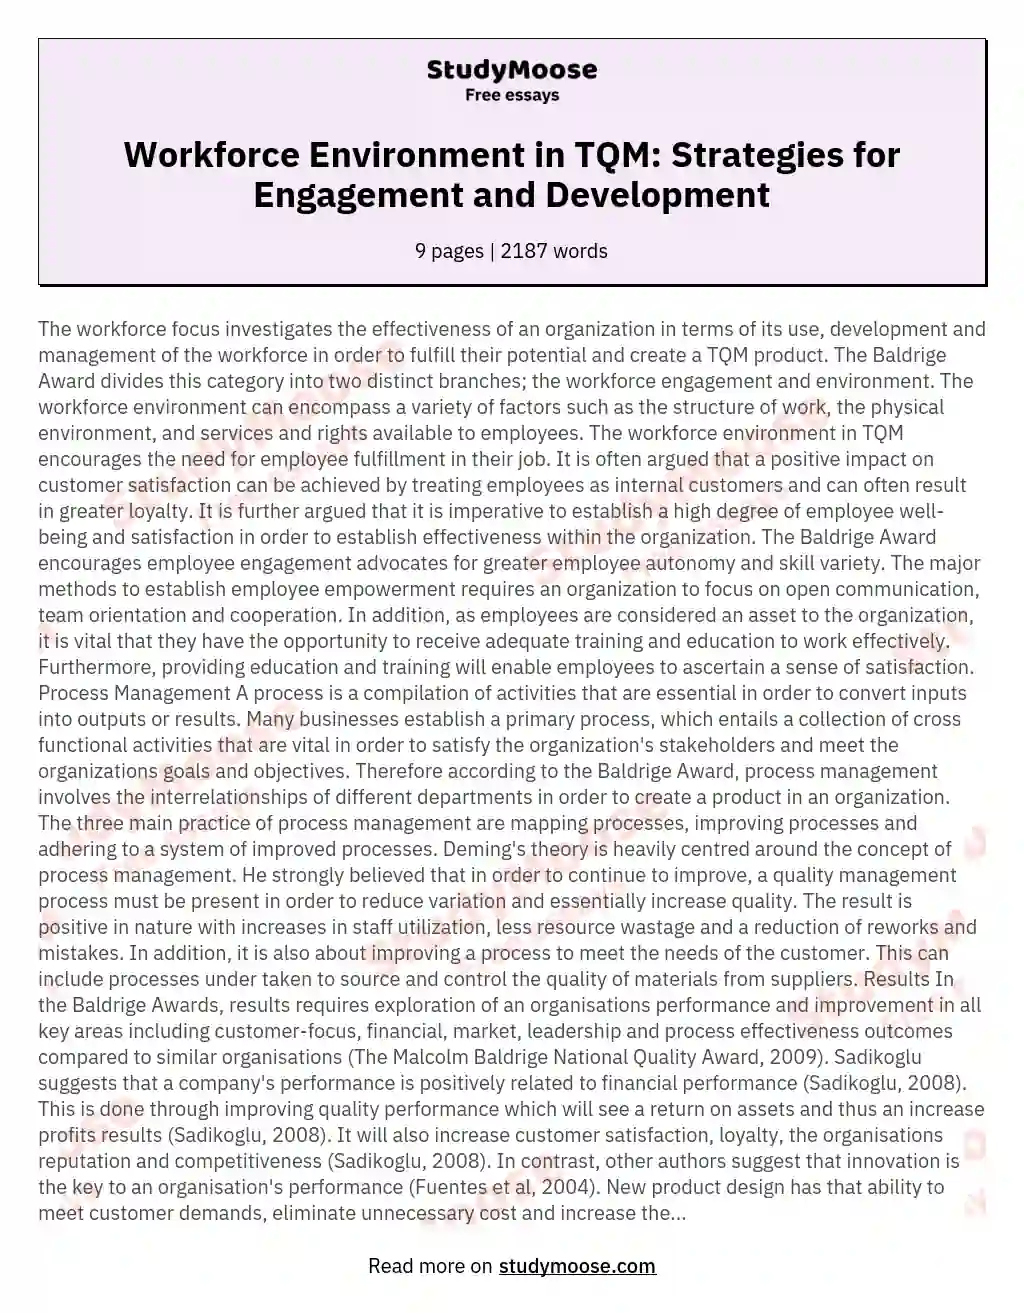 Workforce Environment in TQM: Strategies for Engagement and Development essay